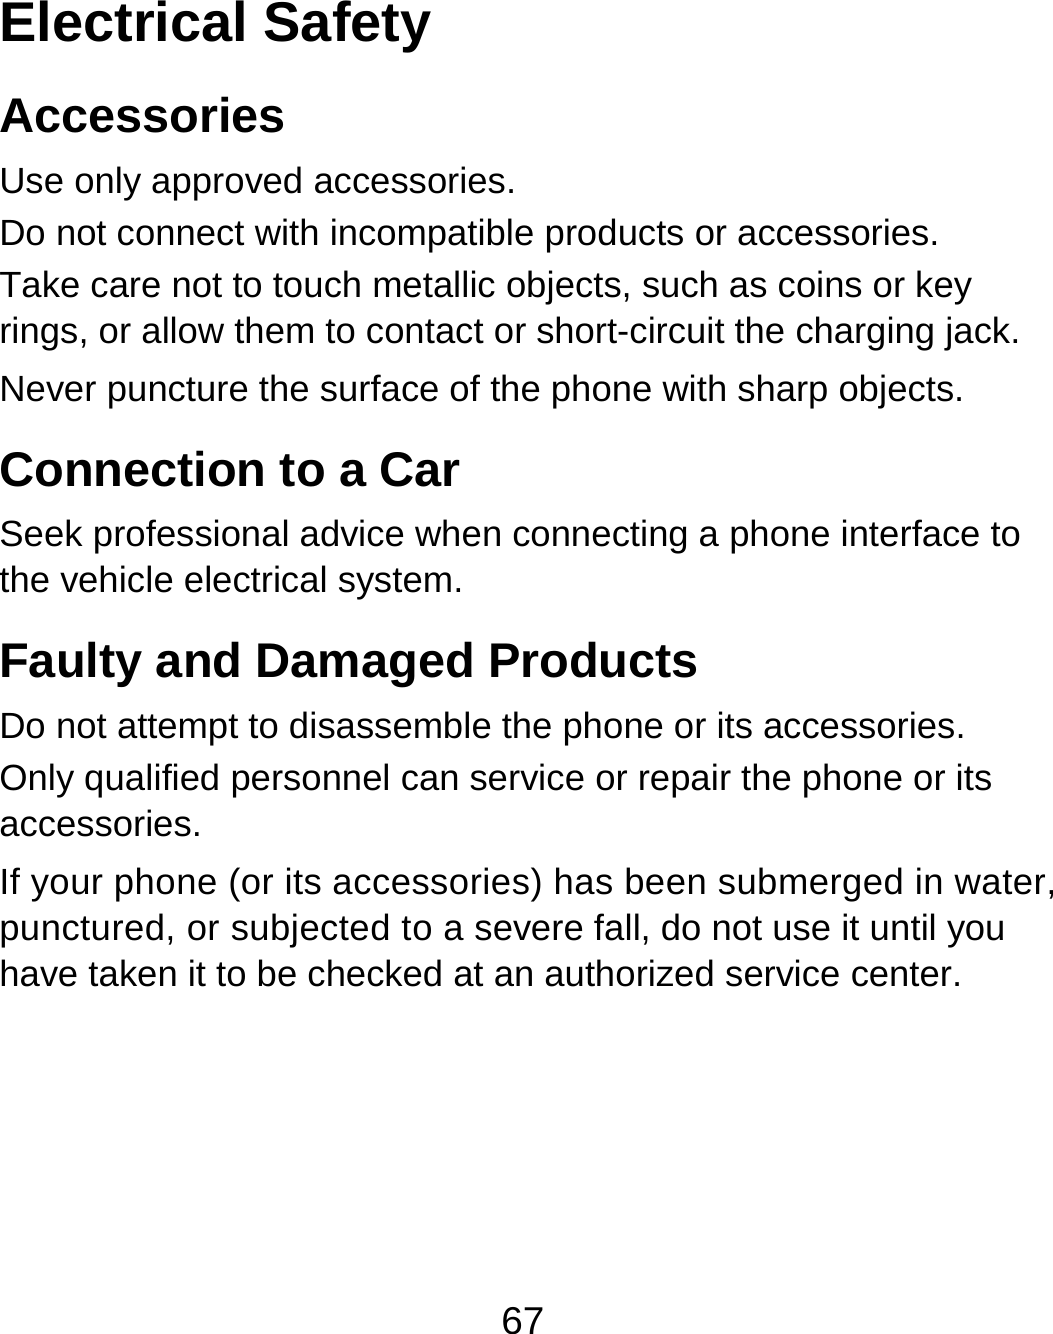 67 Electrical Safety Accessories Use only approved accessories. Do not connect with incompatible products or accessories. Take care not to touch metallic objects, such as coins or key rings, or allow them to contact or short-circuit the charging jack. Never puncture the surface of the phone with sharp objects. Connection to a Car Seek professional advice when connecting a phone interface to the vehicle electrical system. Faulty and Damaged Products Do not attempt to disassemble the phone or its accessories. Only qualified personnel can service or repair the phone or its accessories. If your phone (or its accessories) has been submerged in water, punctured, or subjected to a severe fall, do not use it until you have taken it to be checked at an authorized service center.  